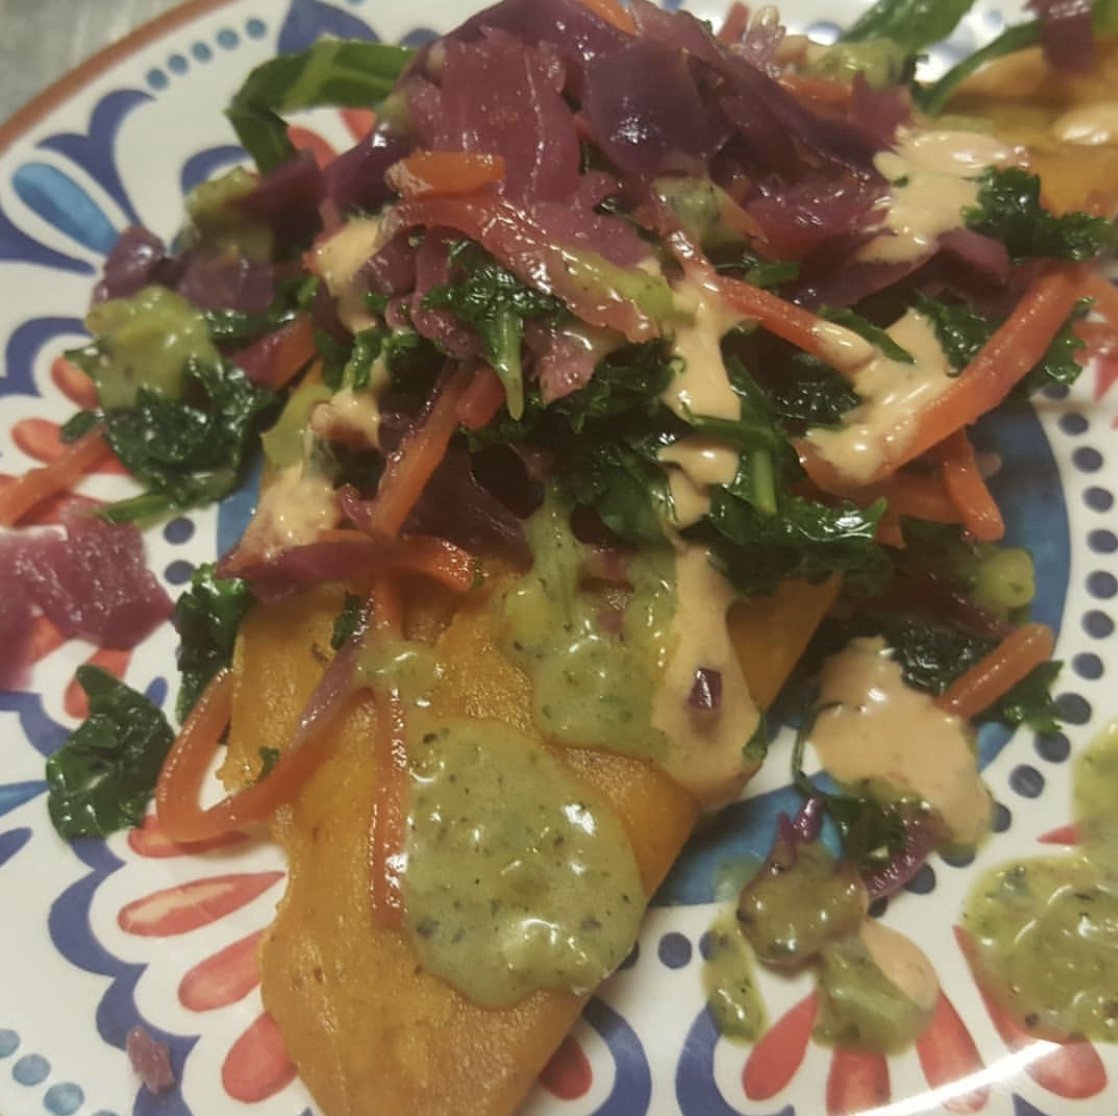 Vegan and gluten free Honduran empanadas stuffed with soy chorizo and potatoes and topped with pickled cabbage, kale salad, and spicy avocado sauce. Picture courtesy of Chef Yari Vargas (casayari).